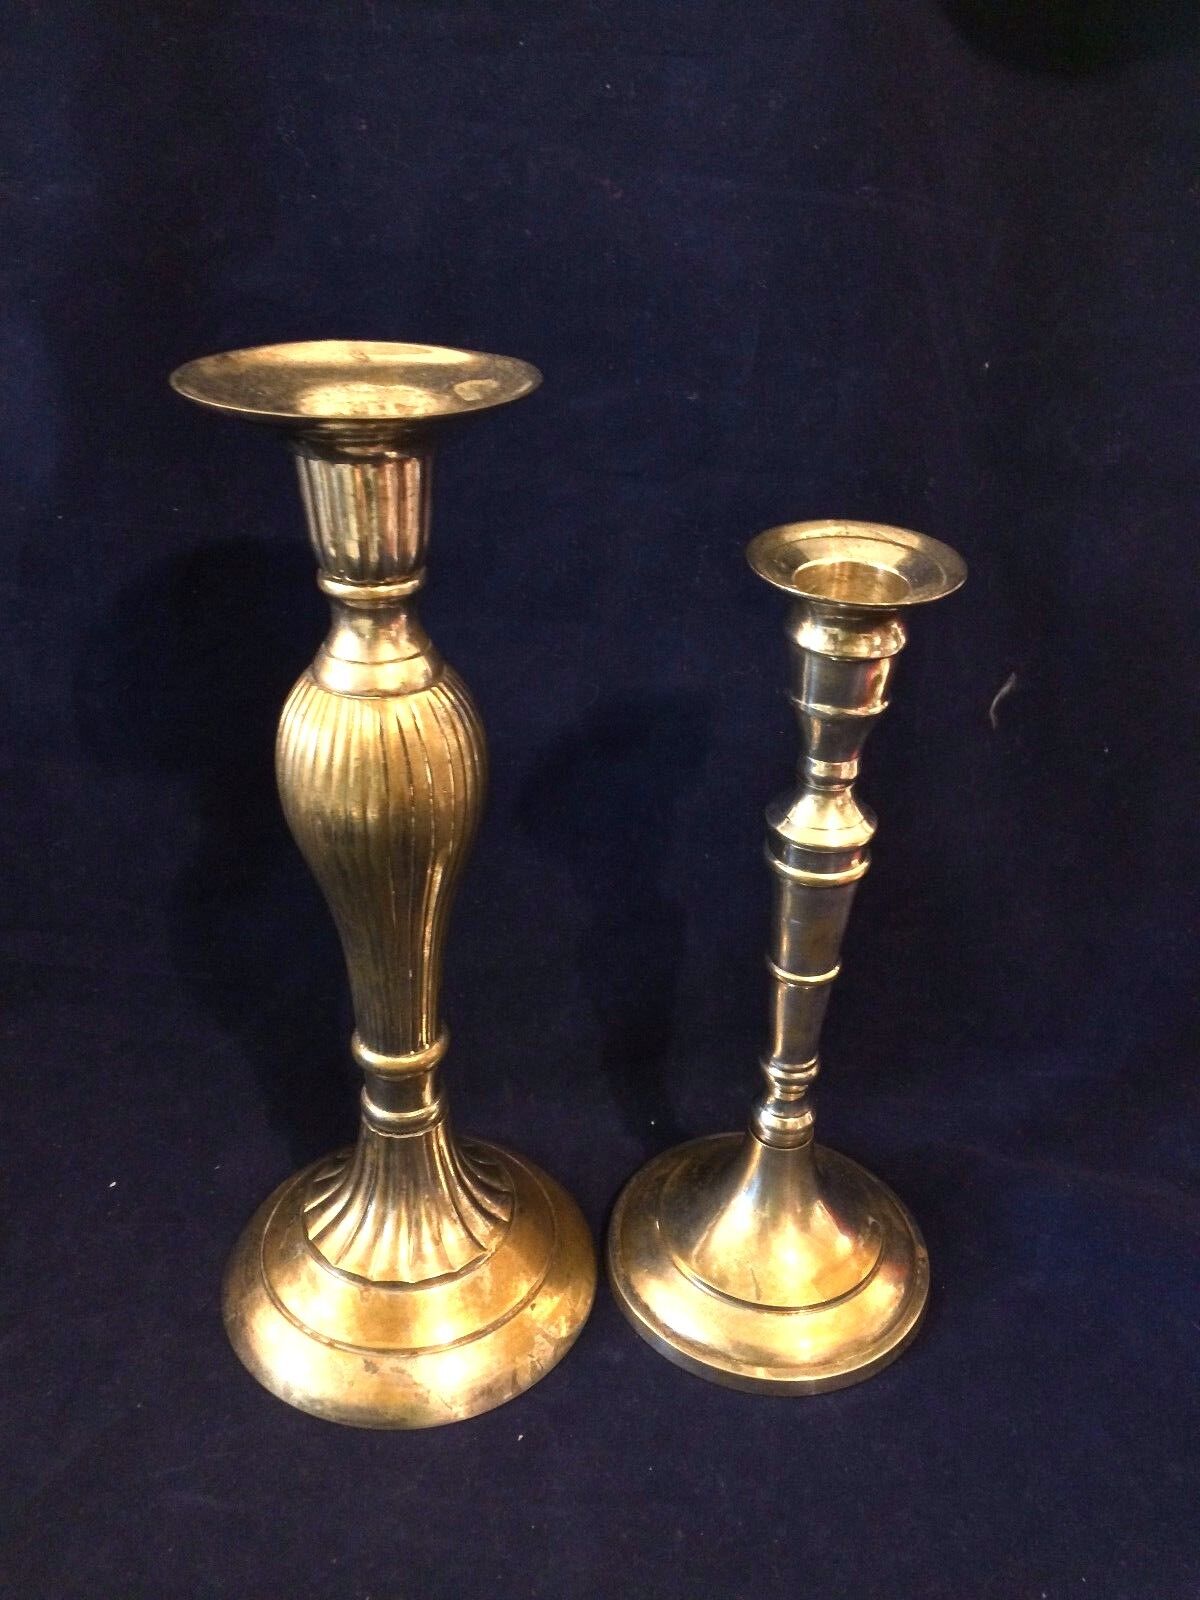 2 Pcs International Silver Co Candlestick Holders Silver Plated Hand Made India